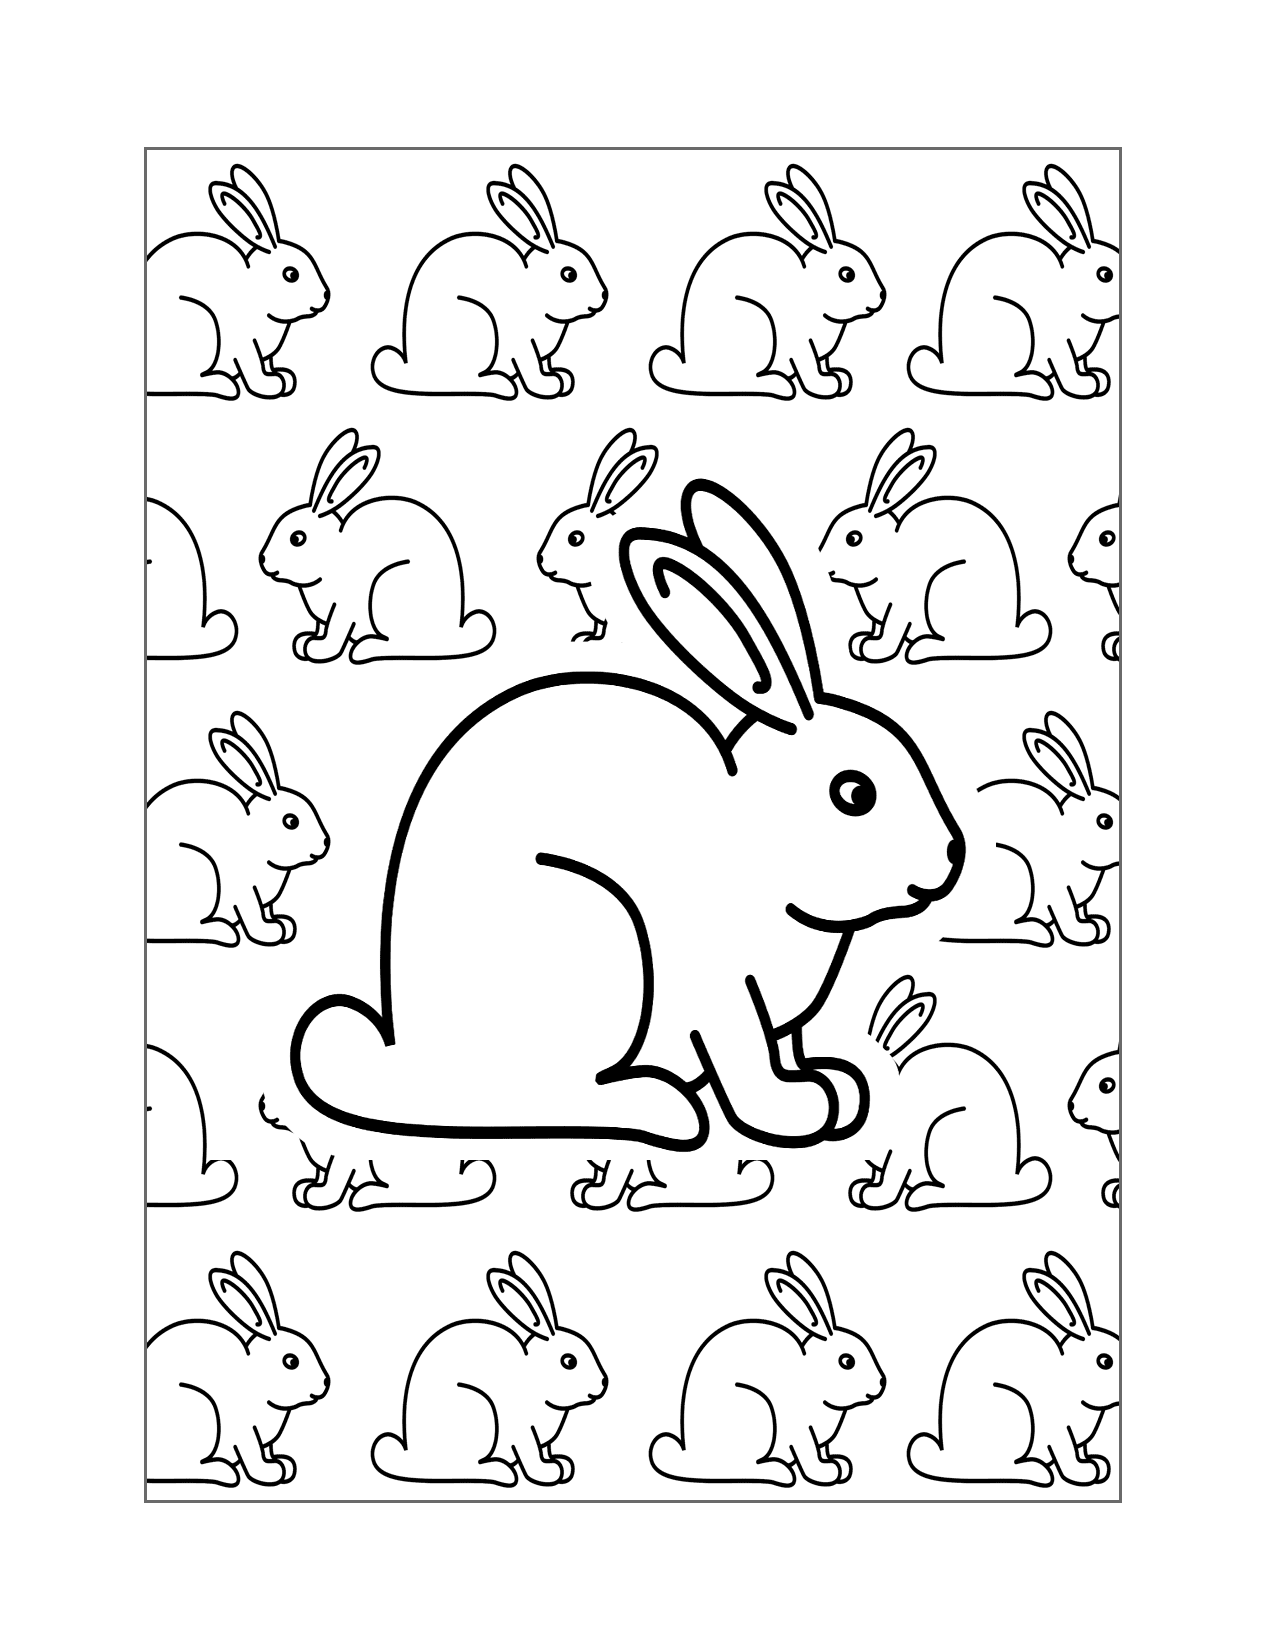 Rabbit Pattern Coloring Page